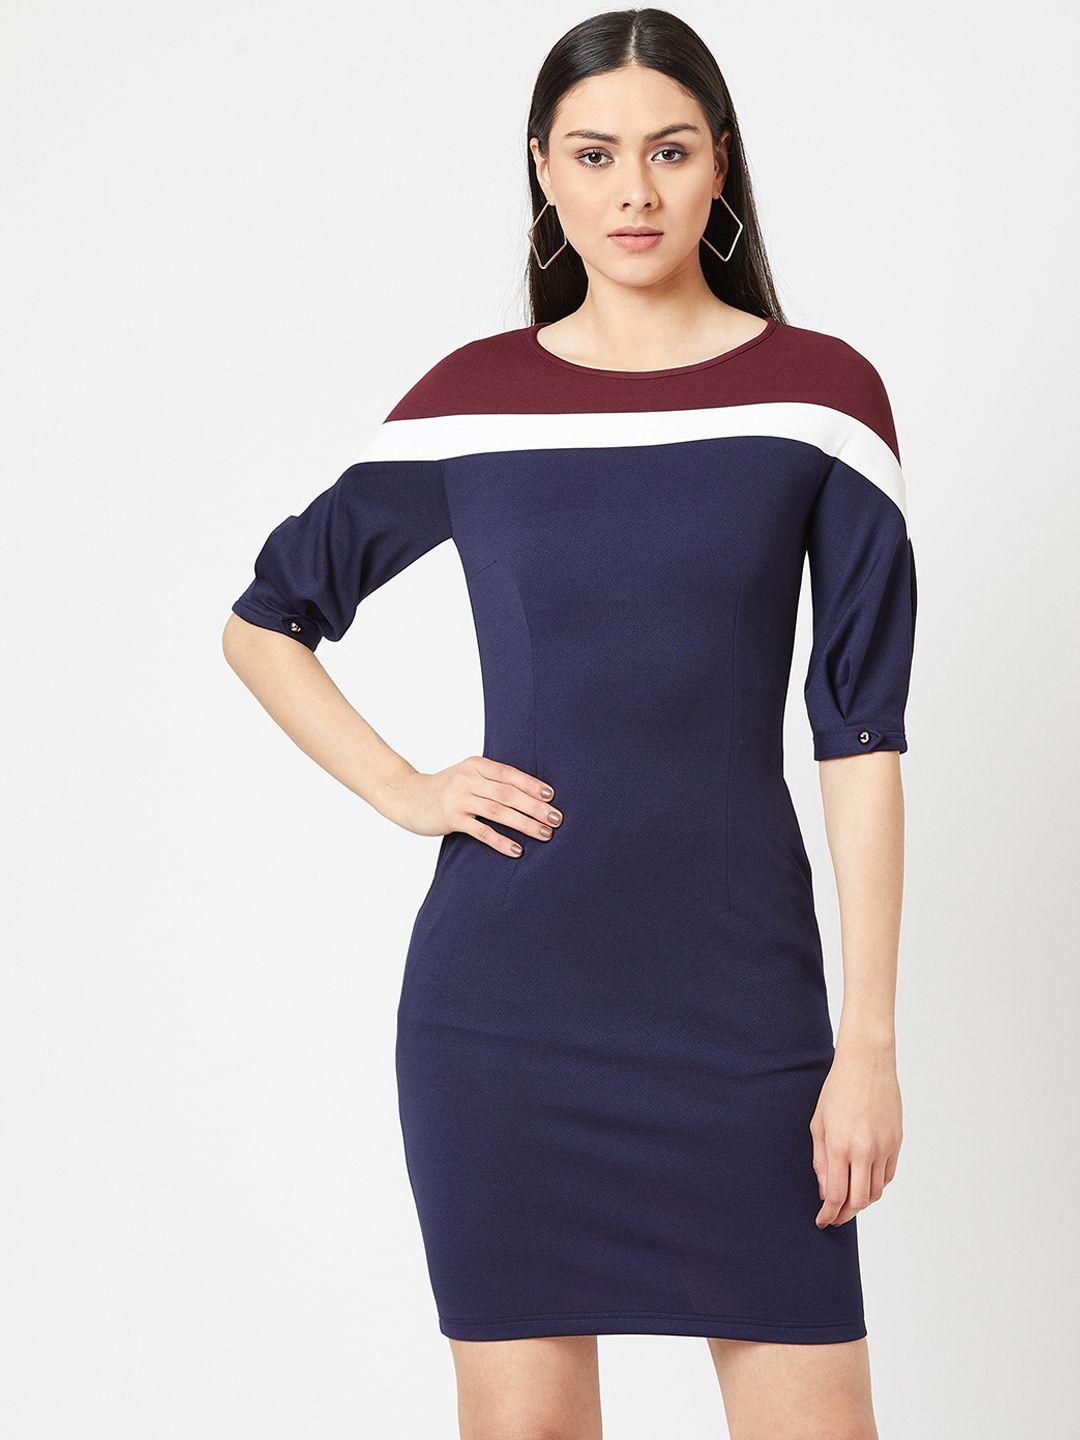 miss-chase-navy-blue-&-red-striped-crepe-bodycon-dress